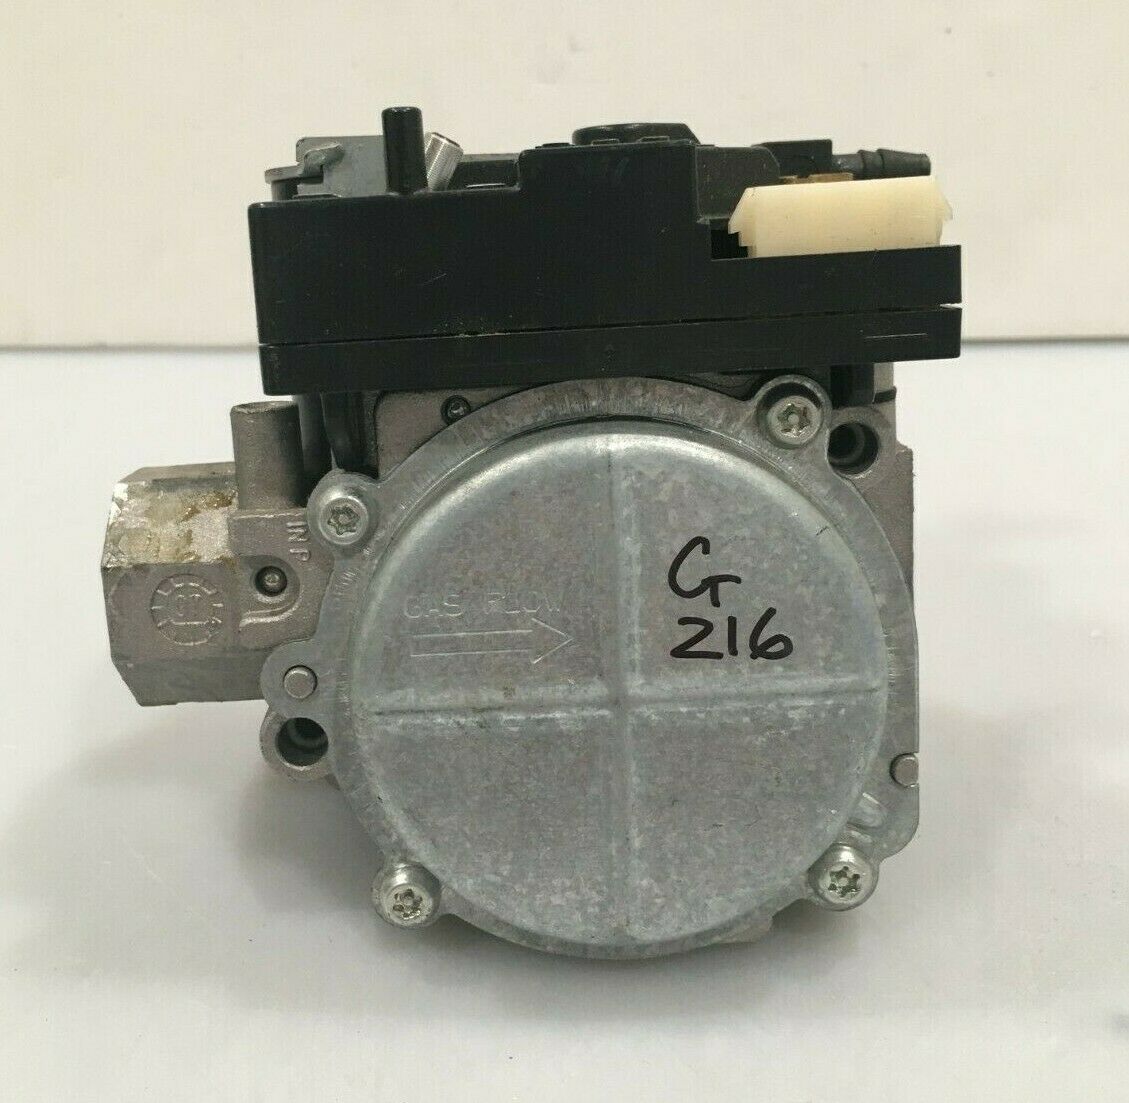 Primary image for White Rodgers 36G54-202 Trane C342087P01 Furnace Gas Valve used #G216